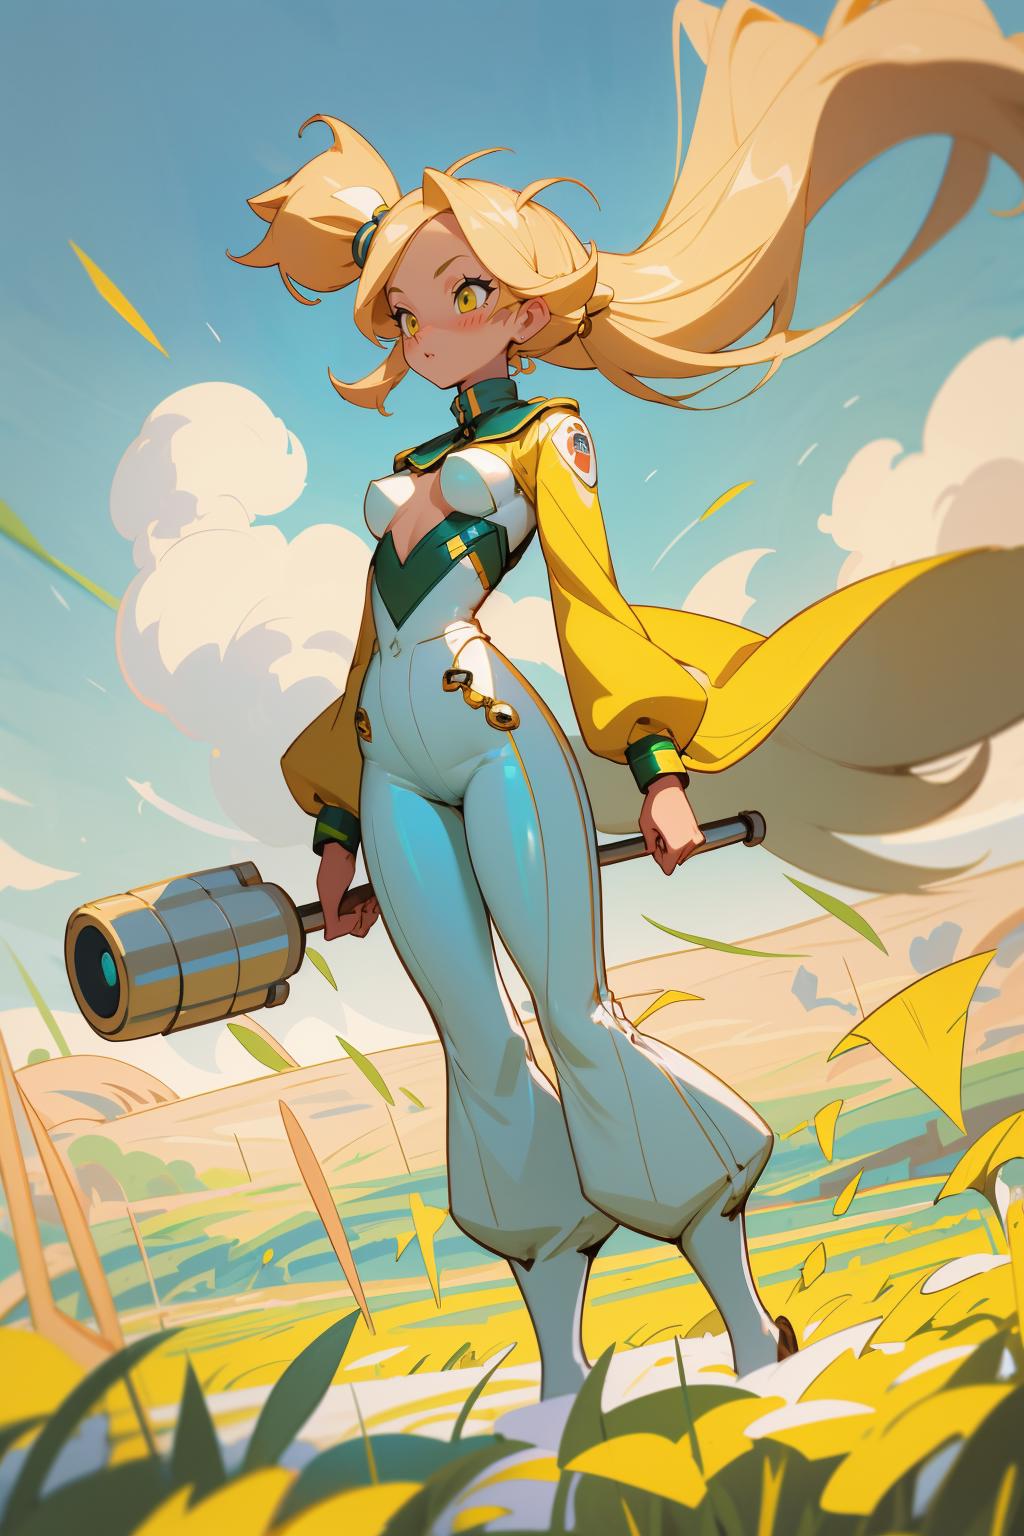 A cartoon illustration of a female character holding a hammer and wearing a yellow and white uniform.